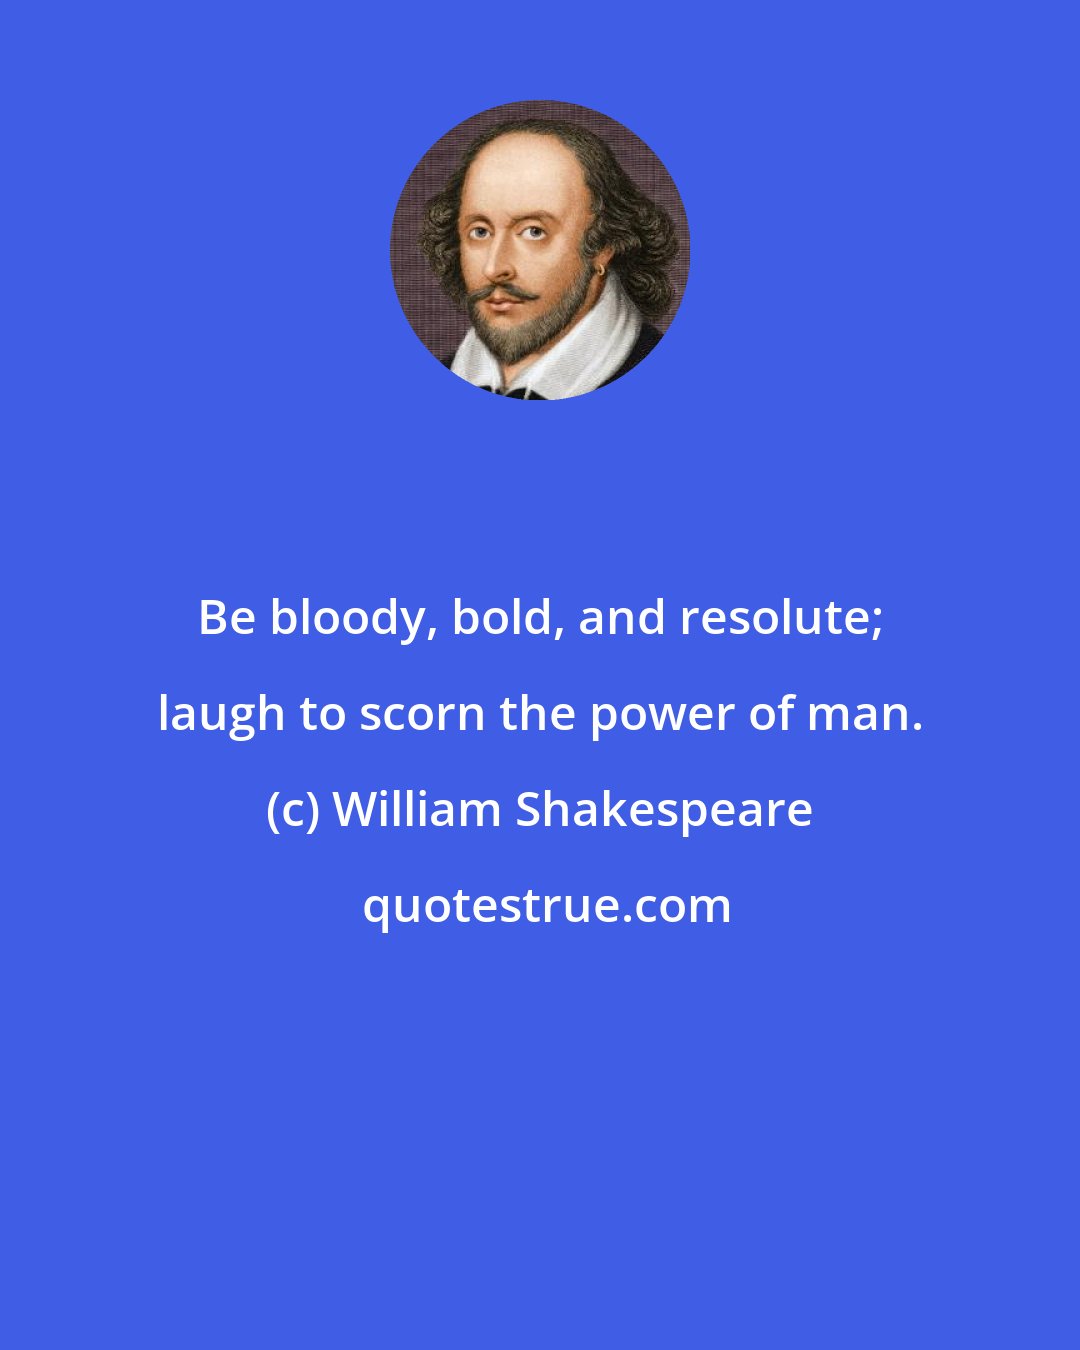 William Shakespeare: Be bloody, bold, and resolute; laugh to scorn the power of man.